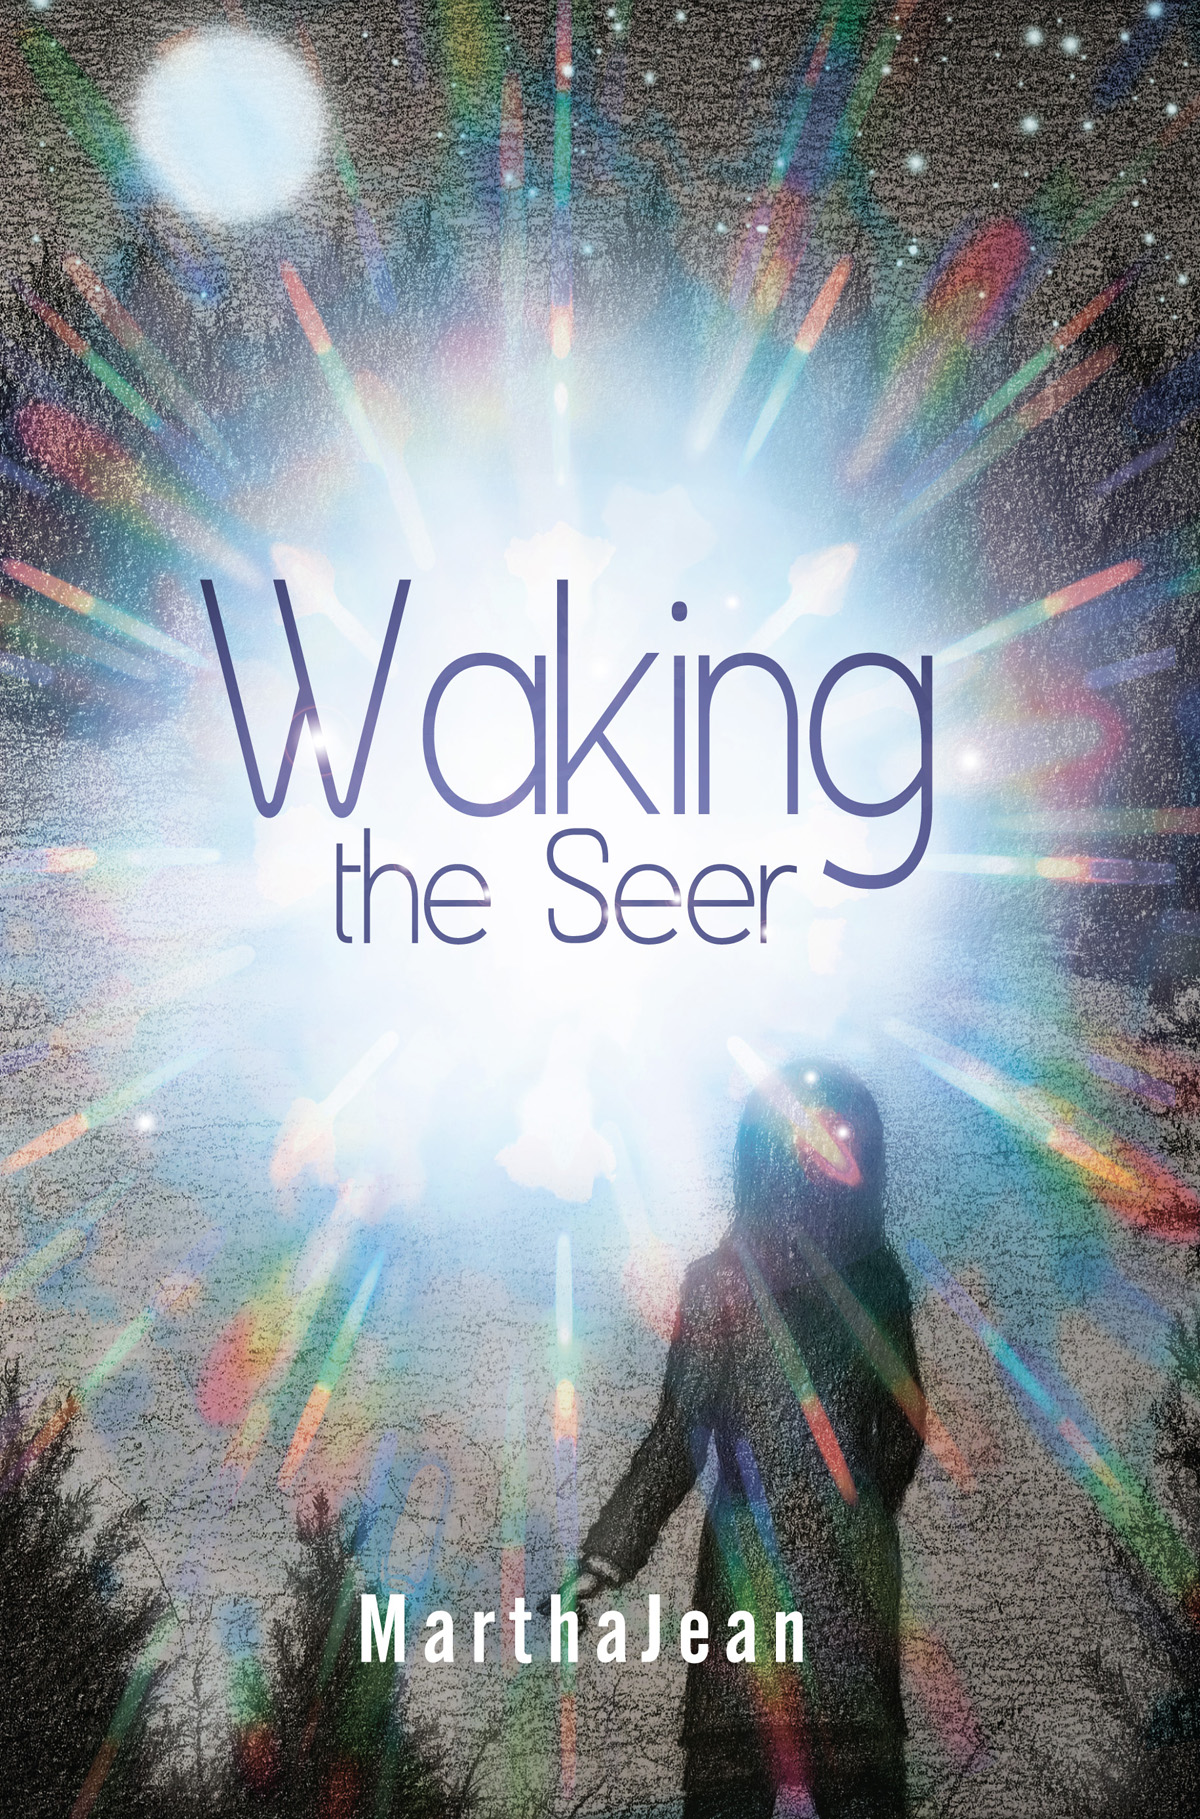 Waking the Seer